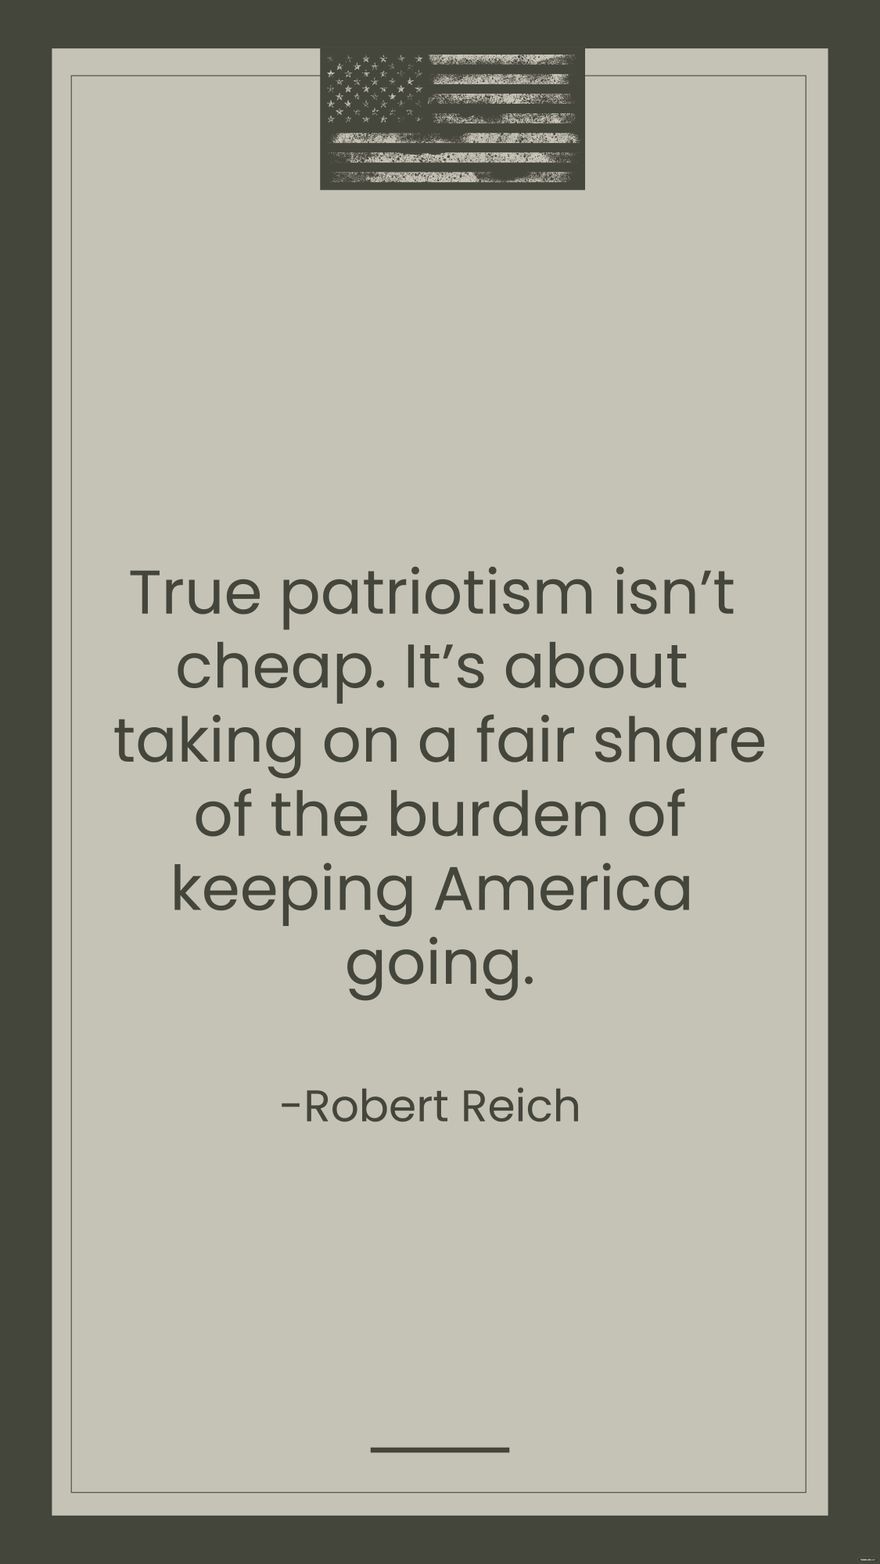  Robert Reich - True patriotism isn't cheap. It's about taking on a fair share of the burden of keeping America going.